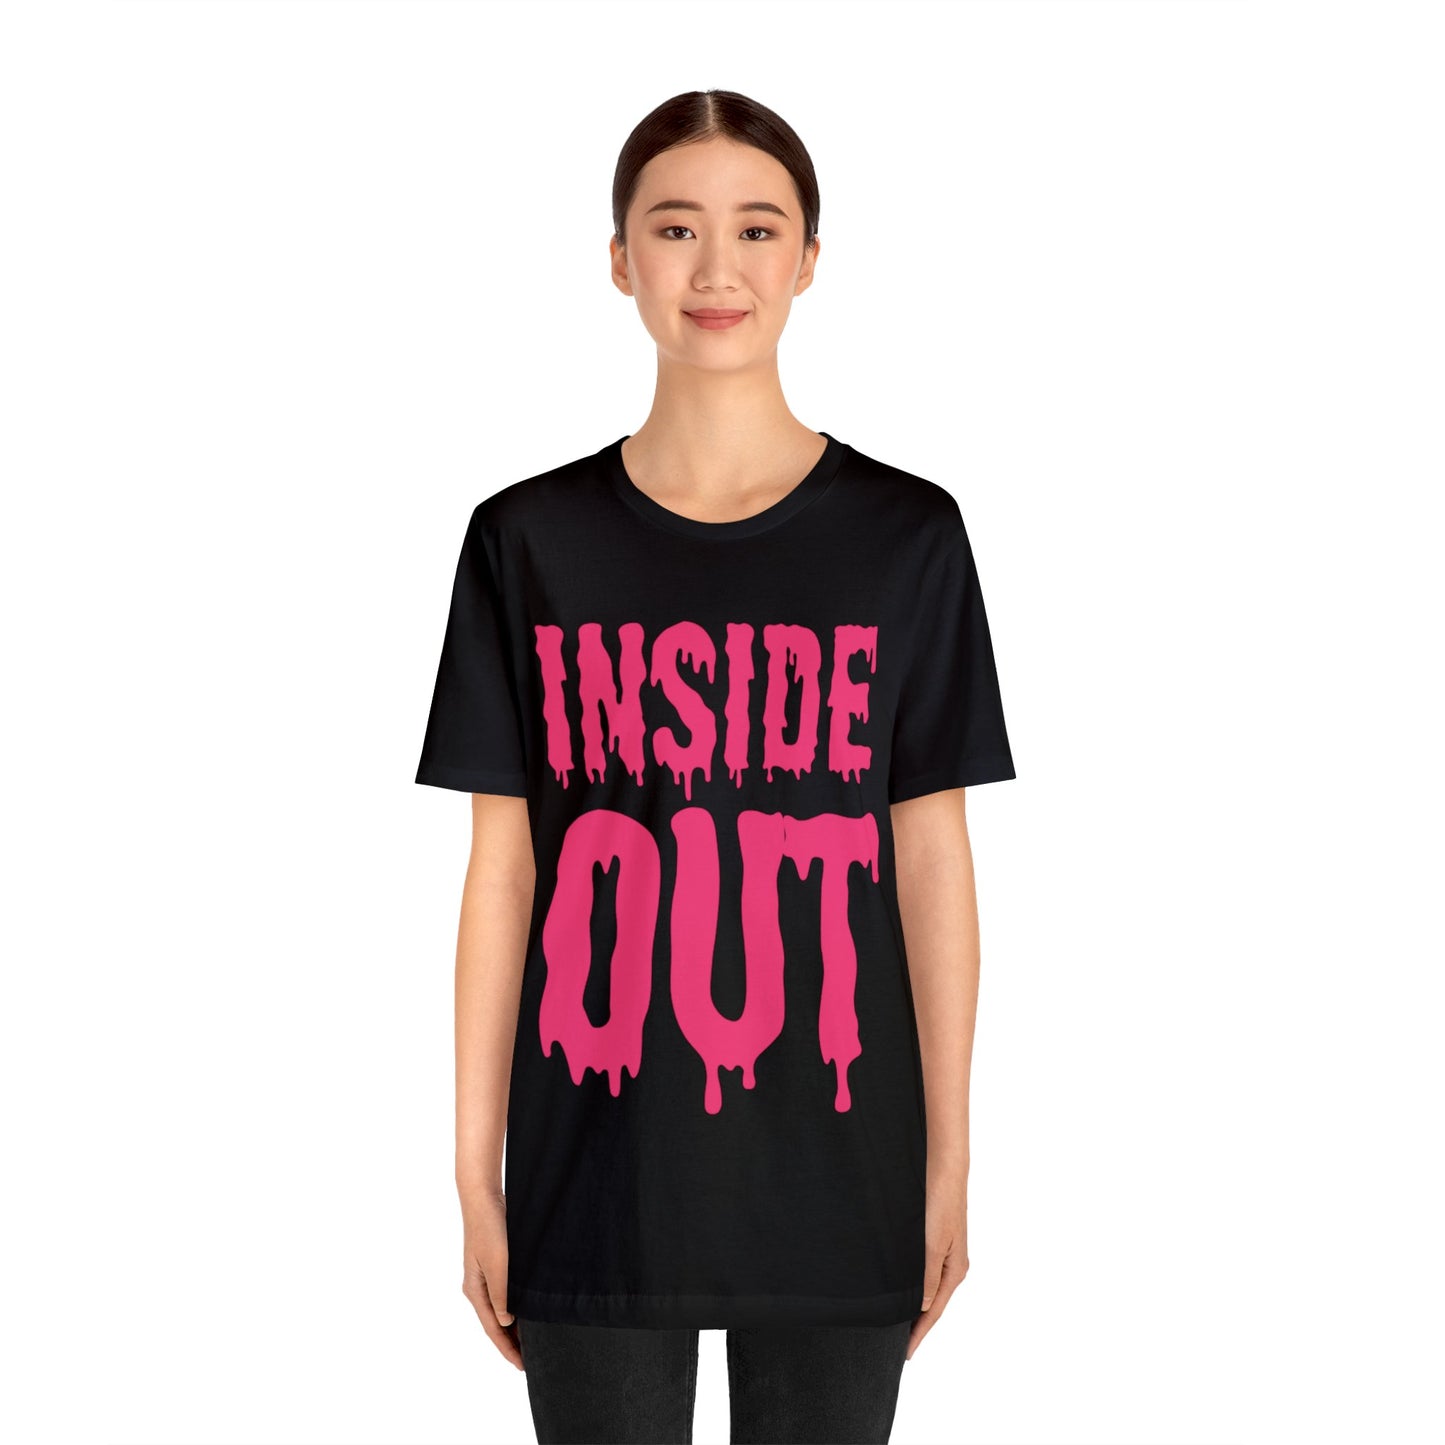 Inside Out T-Shirt